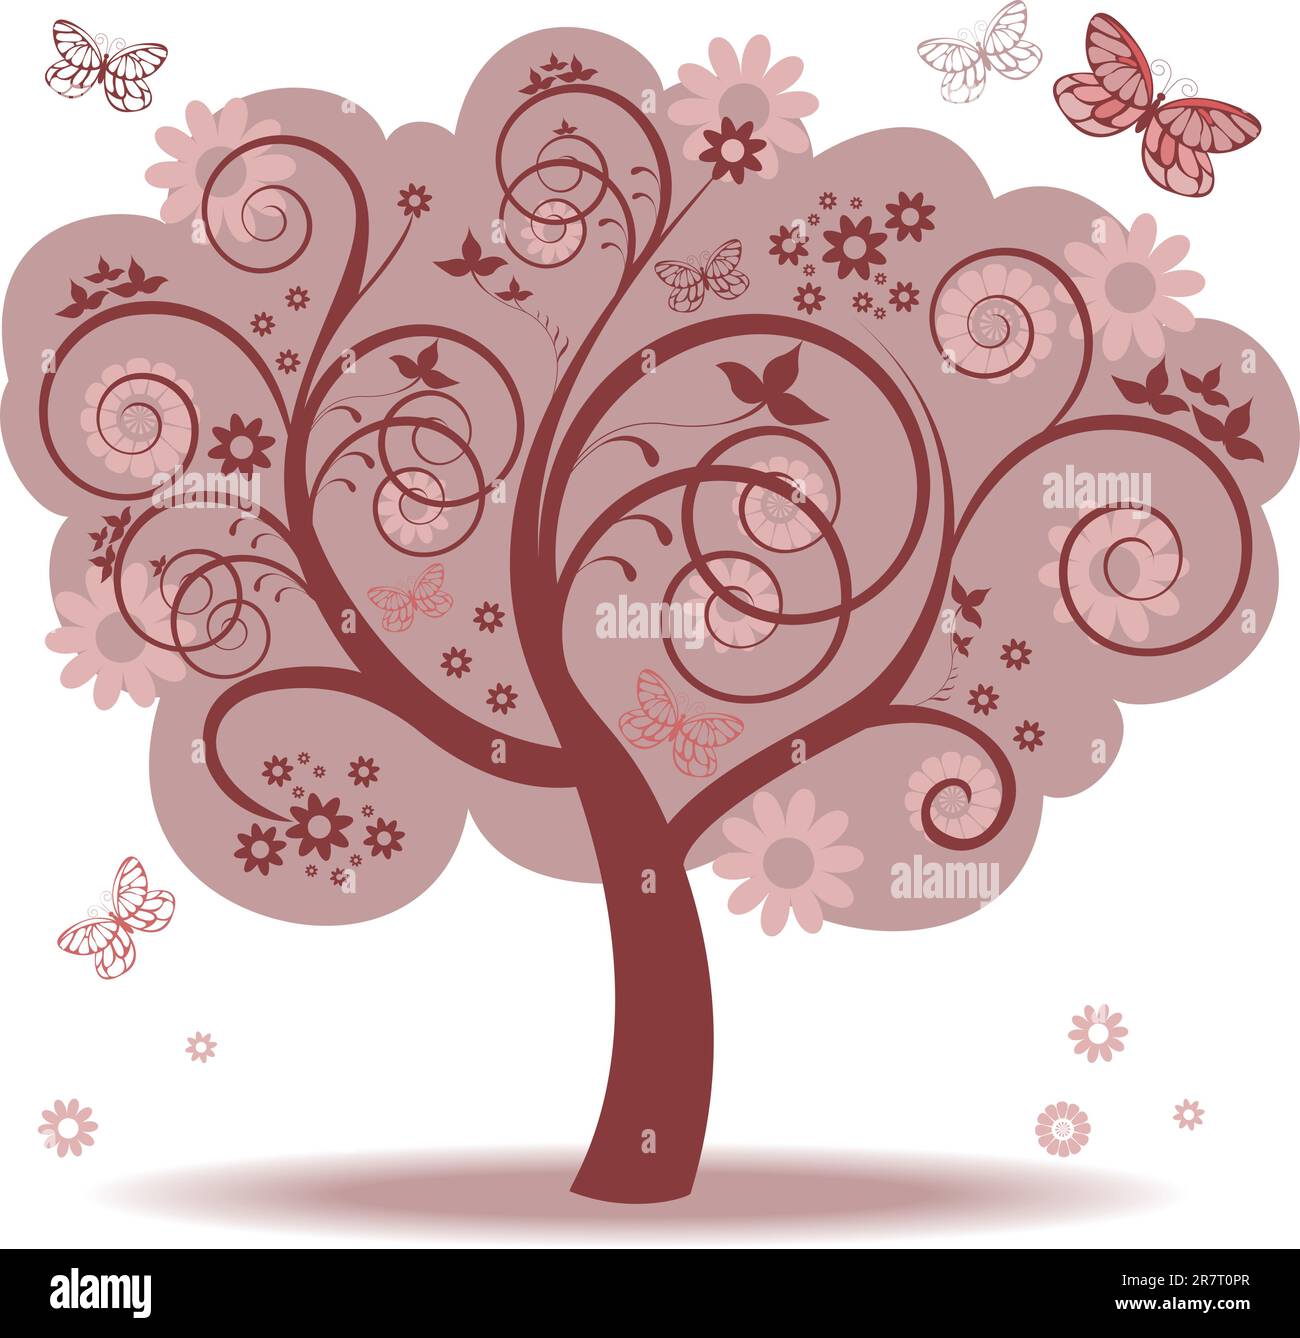 fantasy tree with red leaves and butterflies Stock Vector